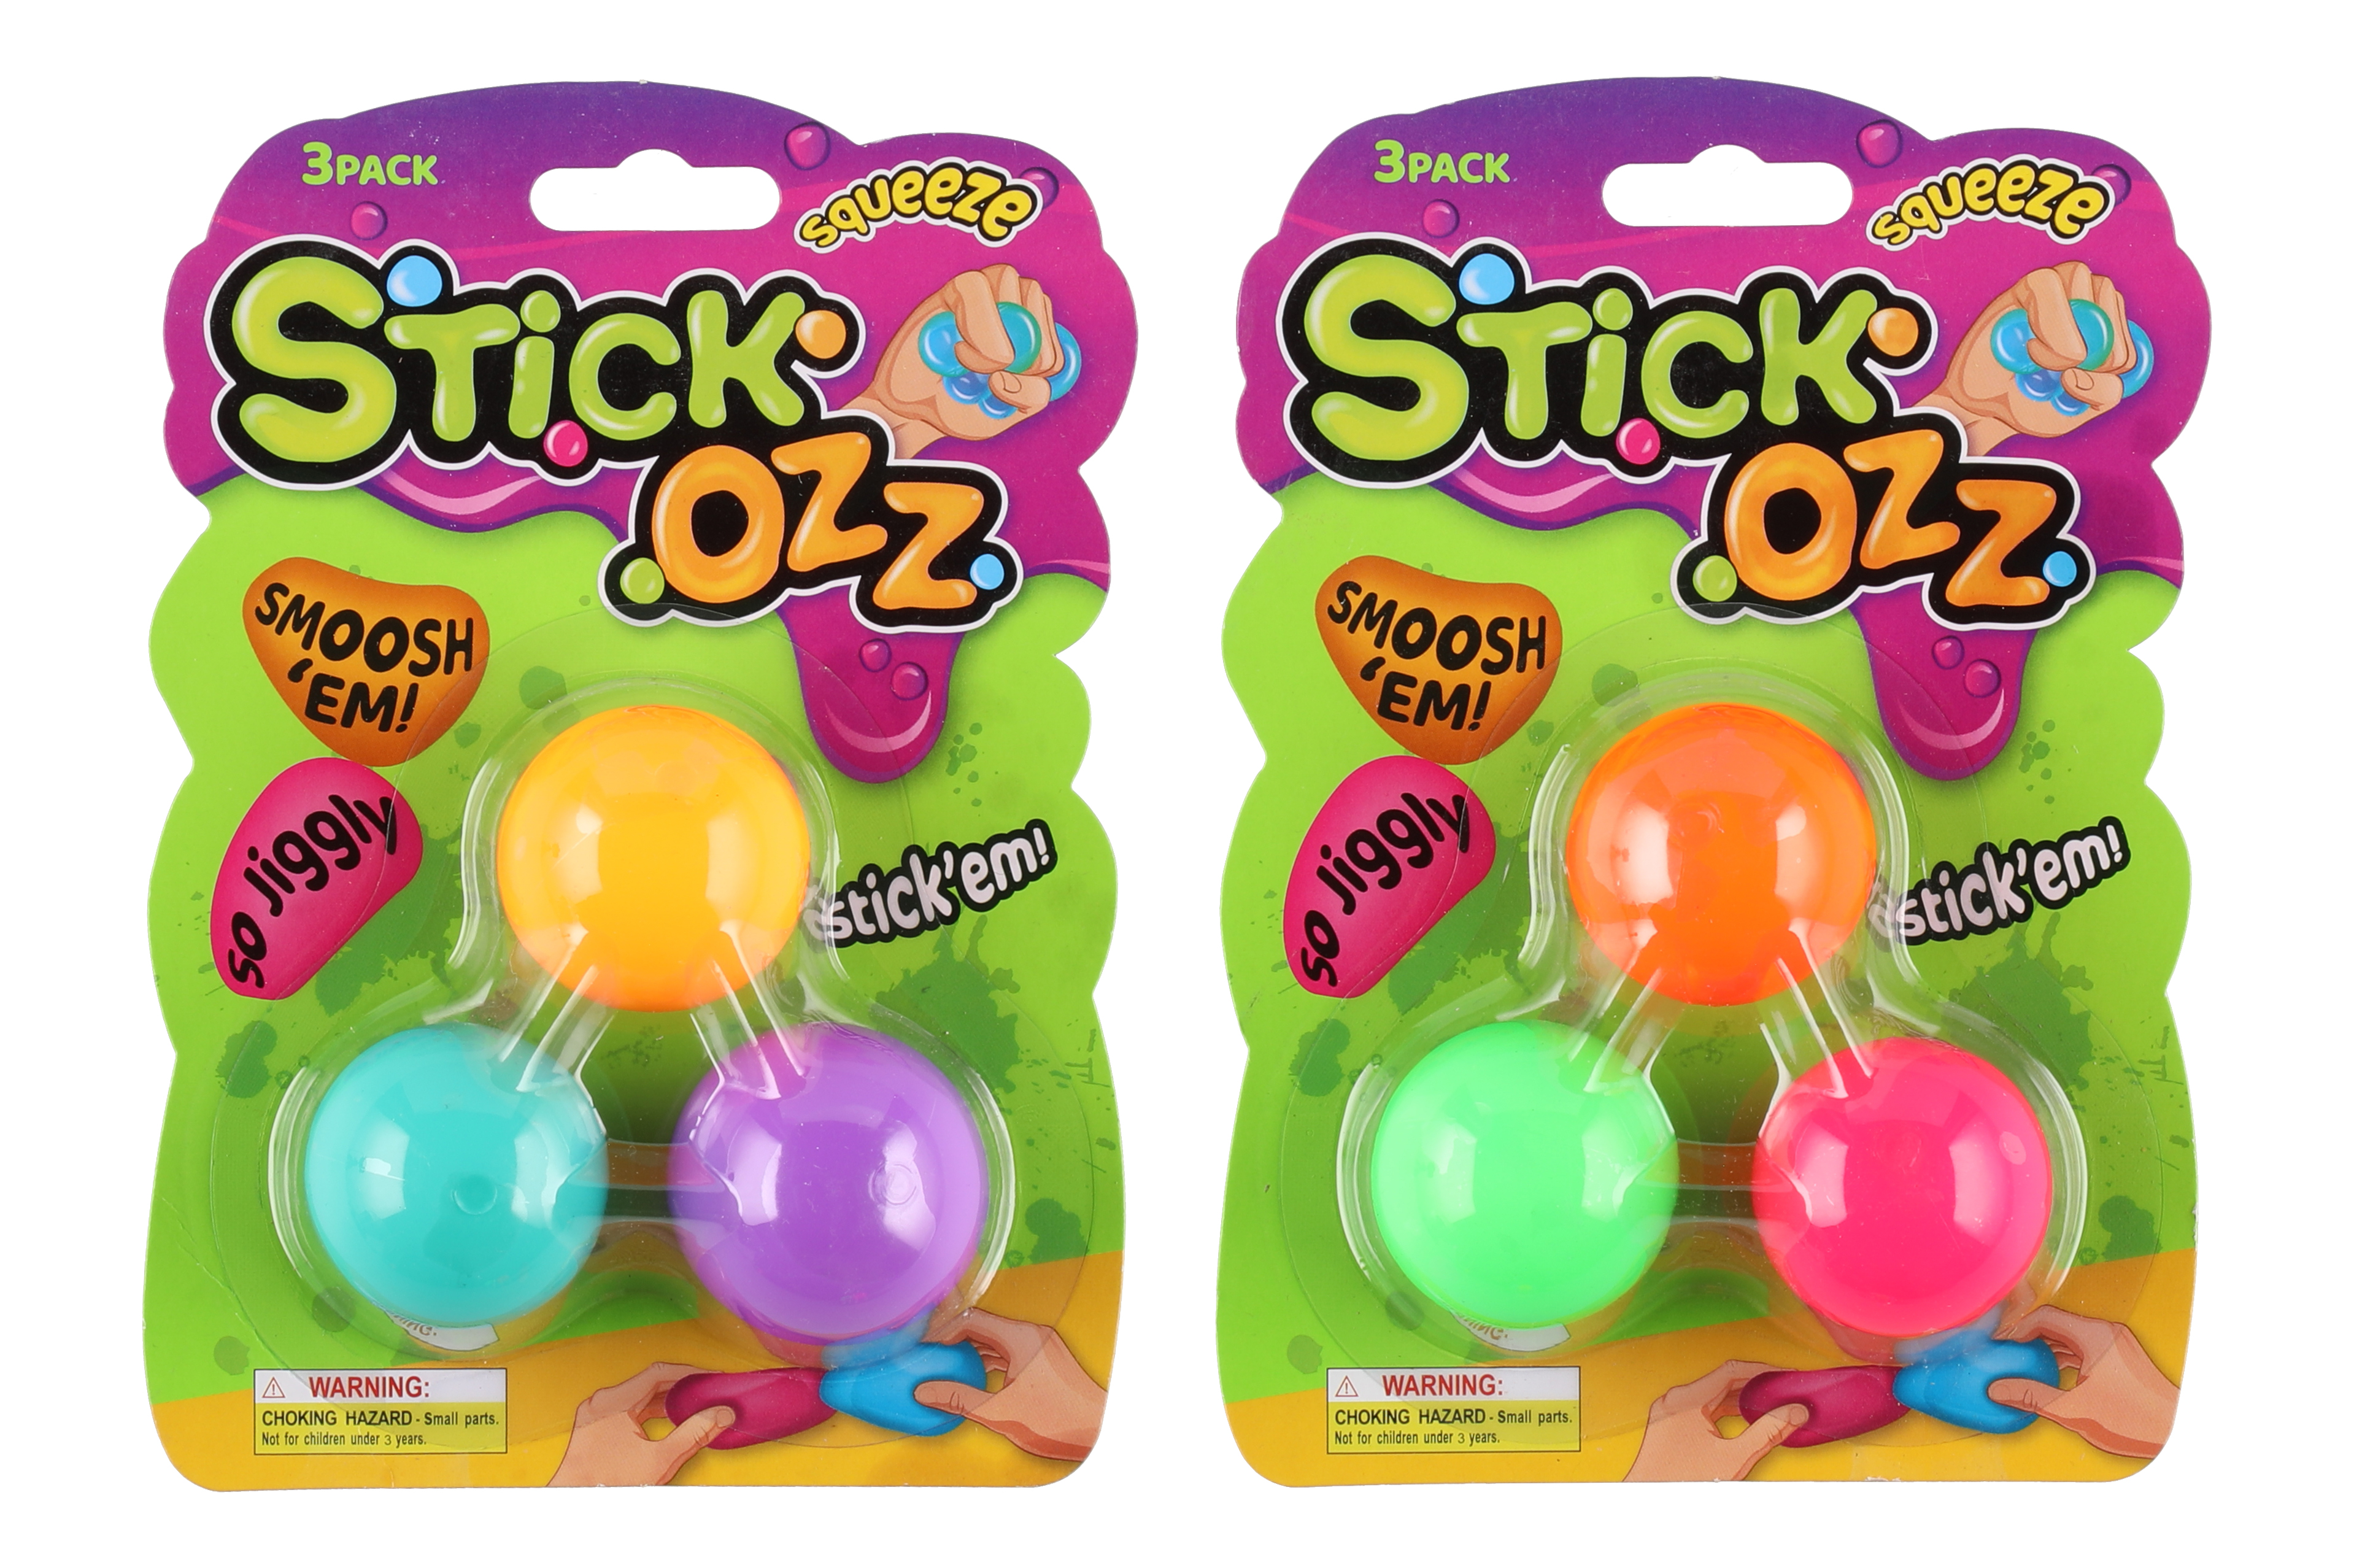 Stick Ozz squeezy toy 3-pack - Robbis Hobby Shop